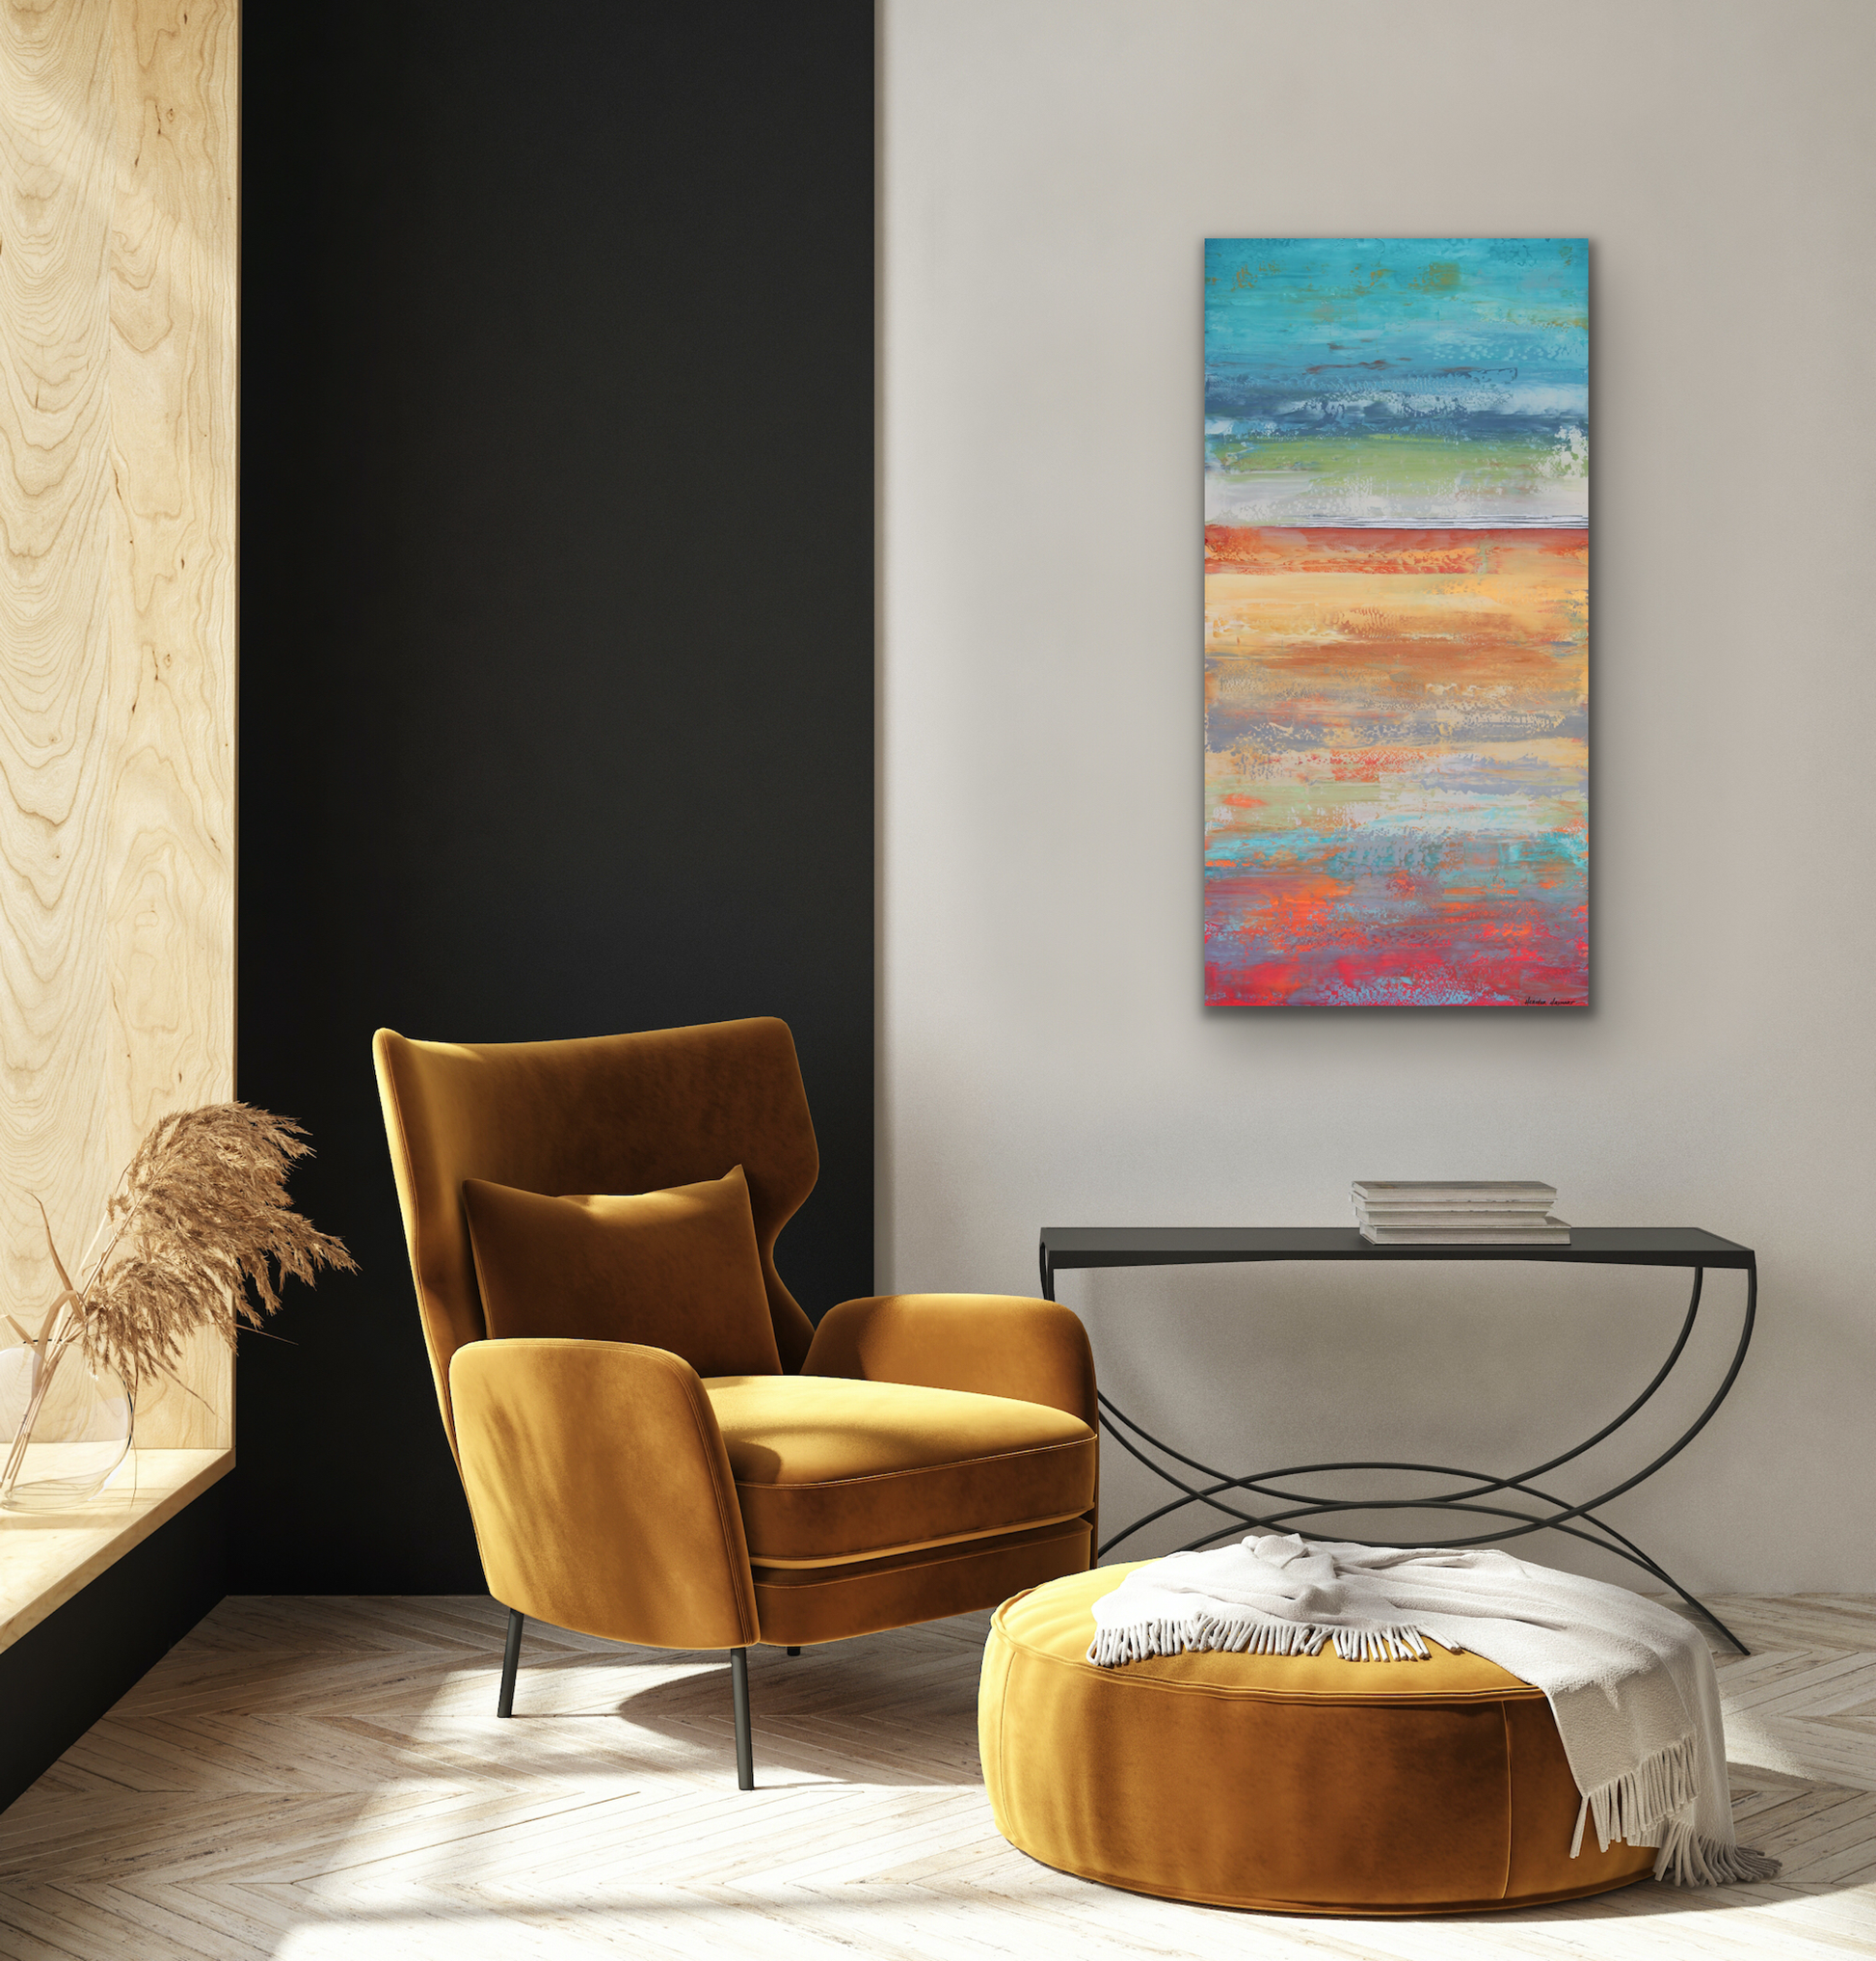 Colorful abstract art on the wall over a yellow chair